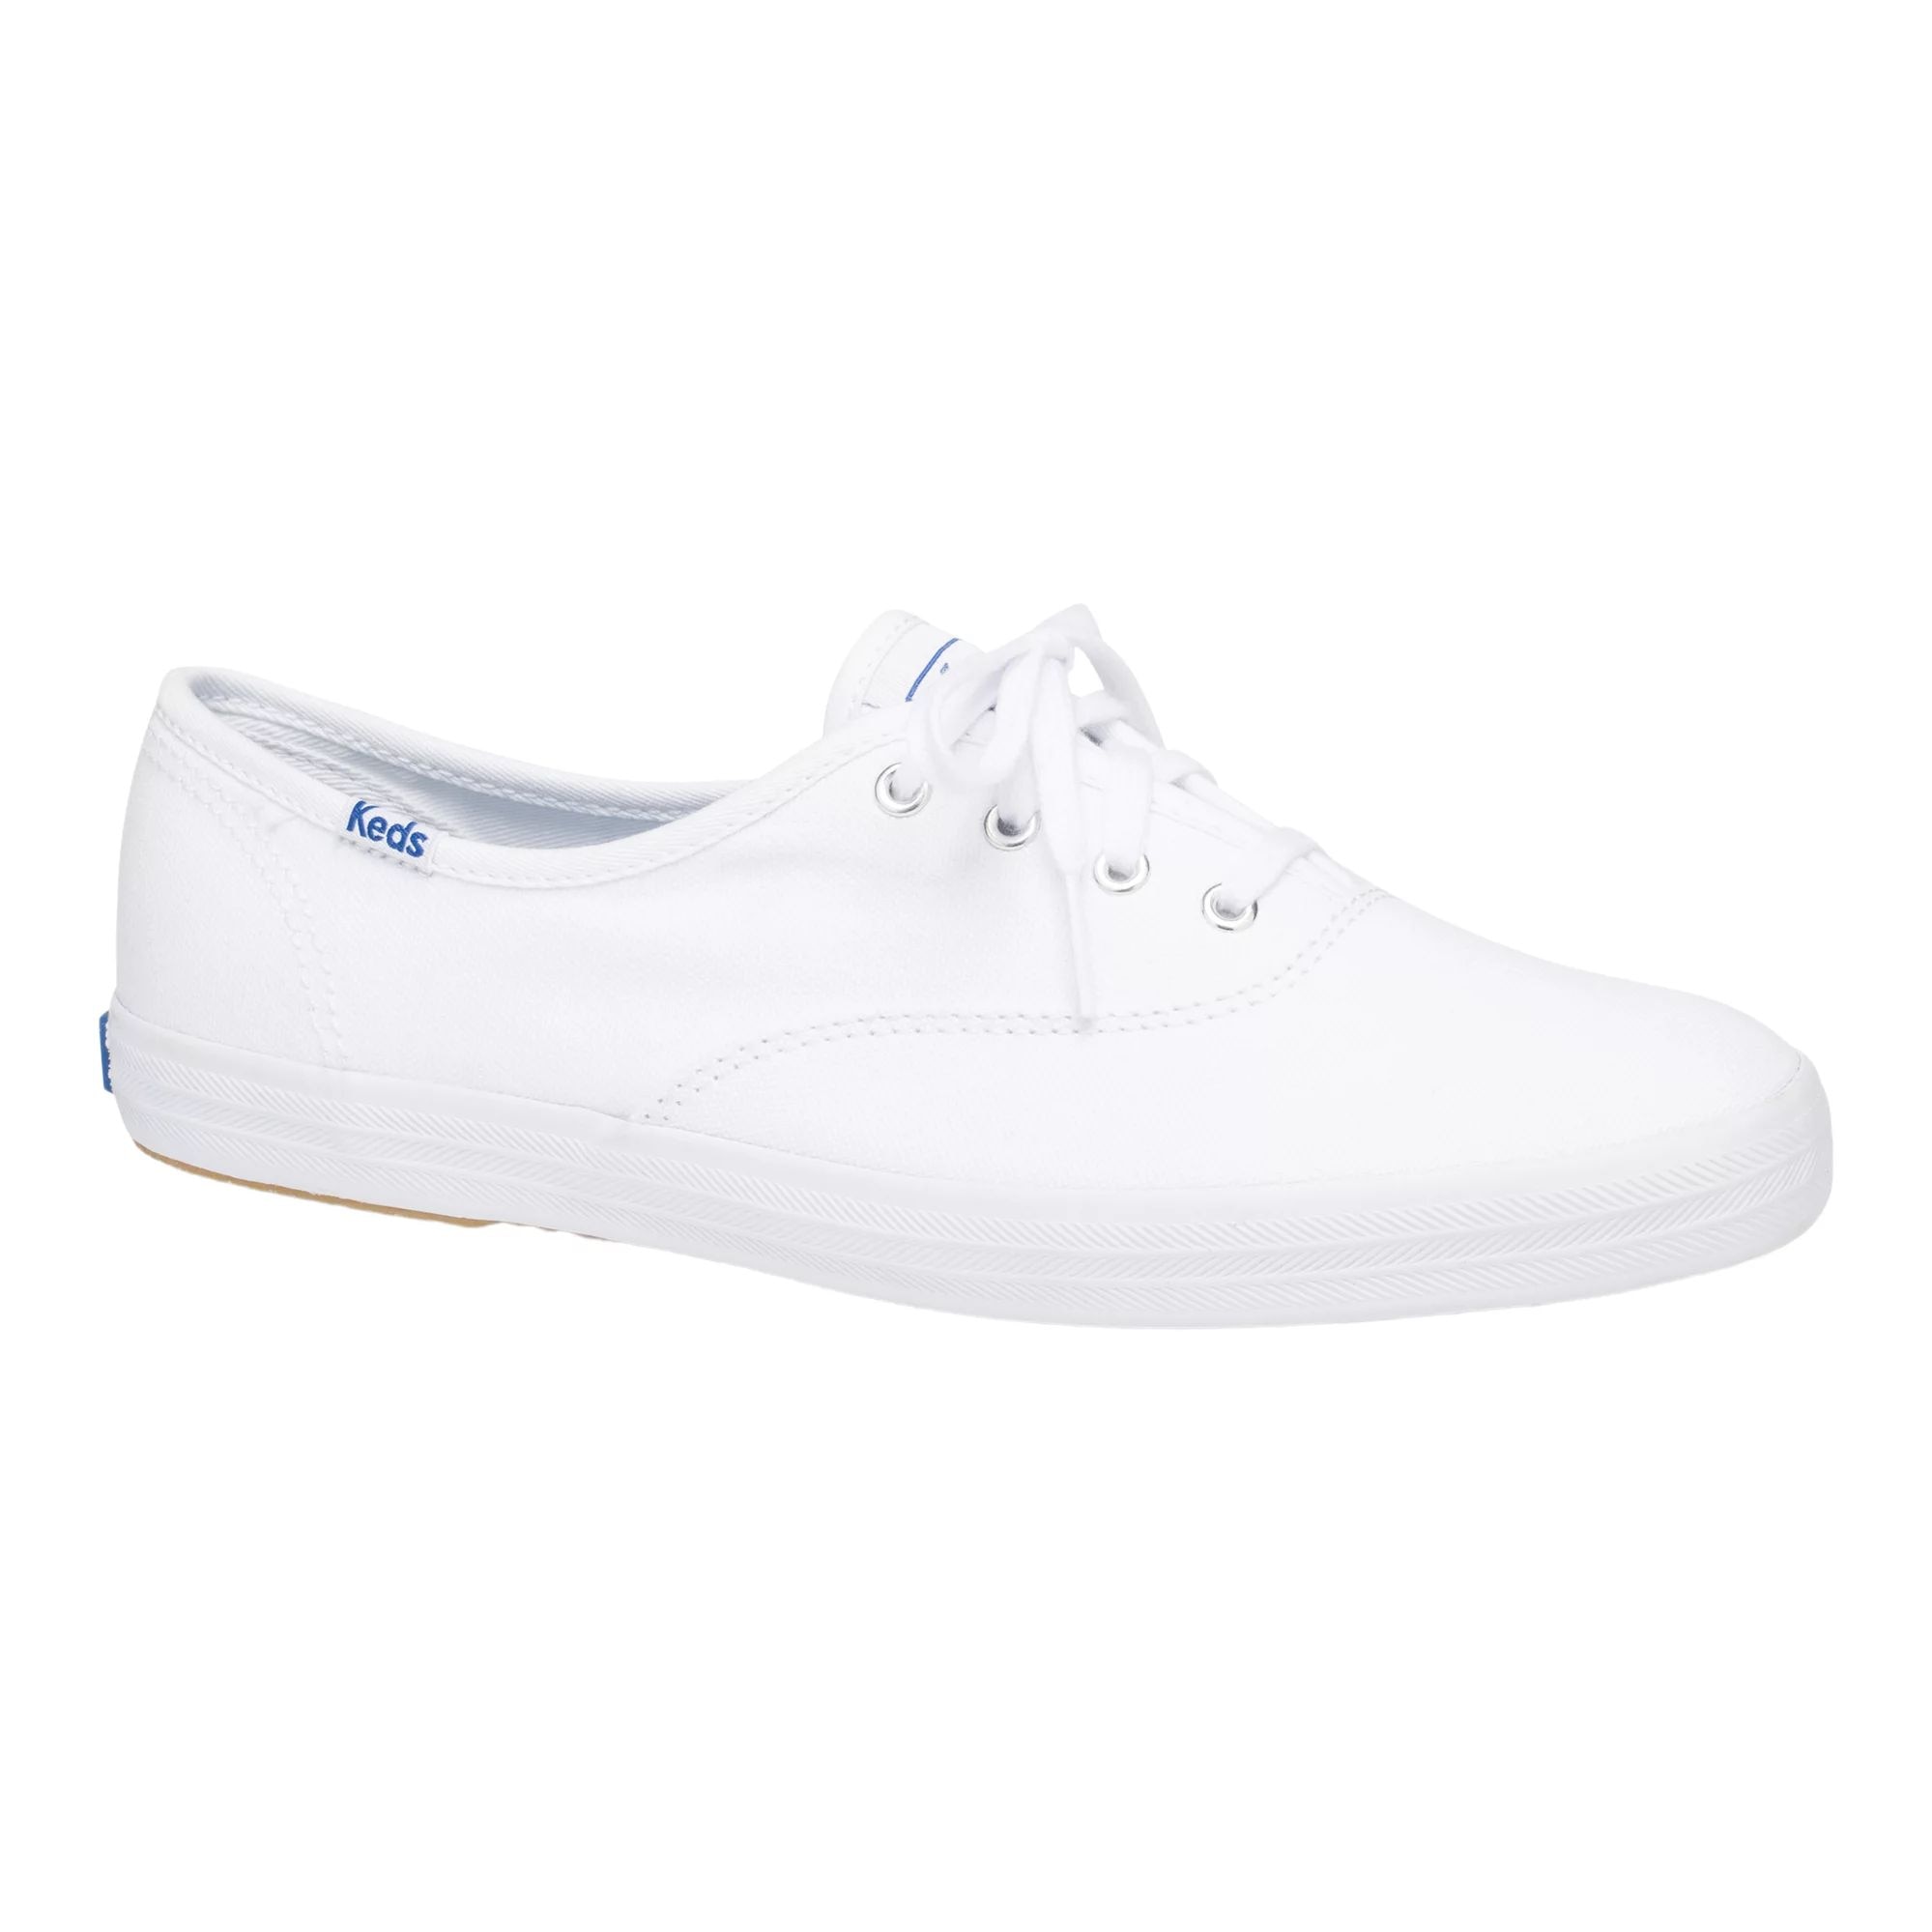 Keds Women's Champion Shoes, Sneakers, Casual